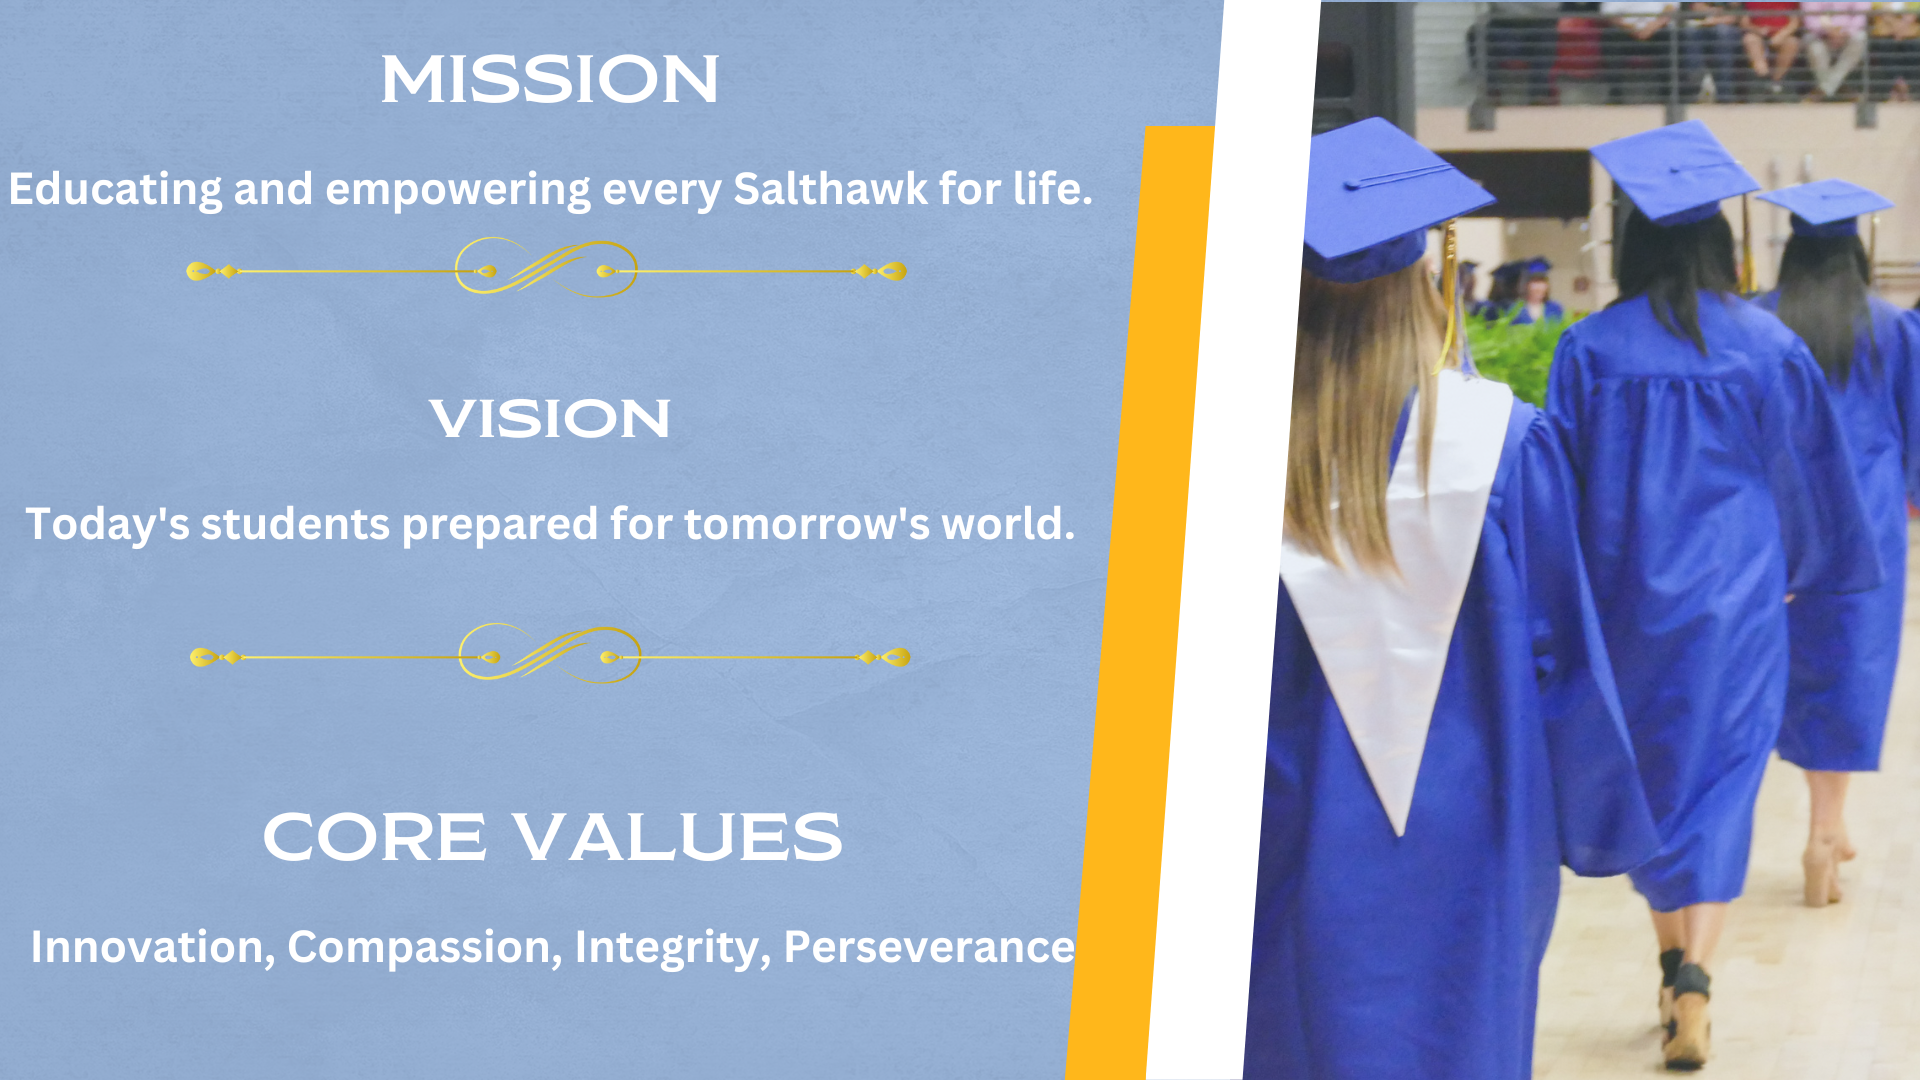 Mission: Educating and empowering every Salthawk for life. Vision: Today's Students prepared for tomorrow's world. Core Values: Innovation, Compassion, Integrity, Perserverance.